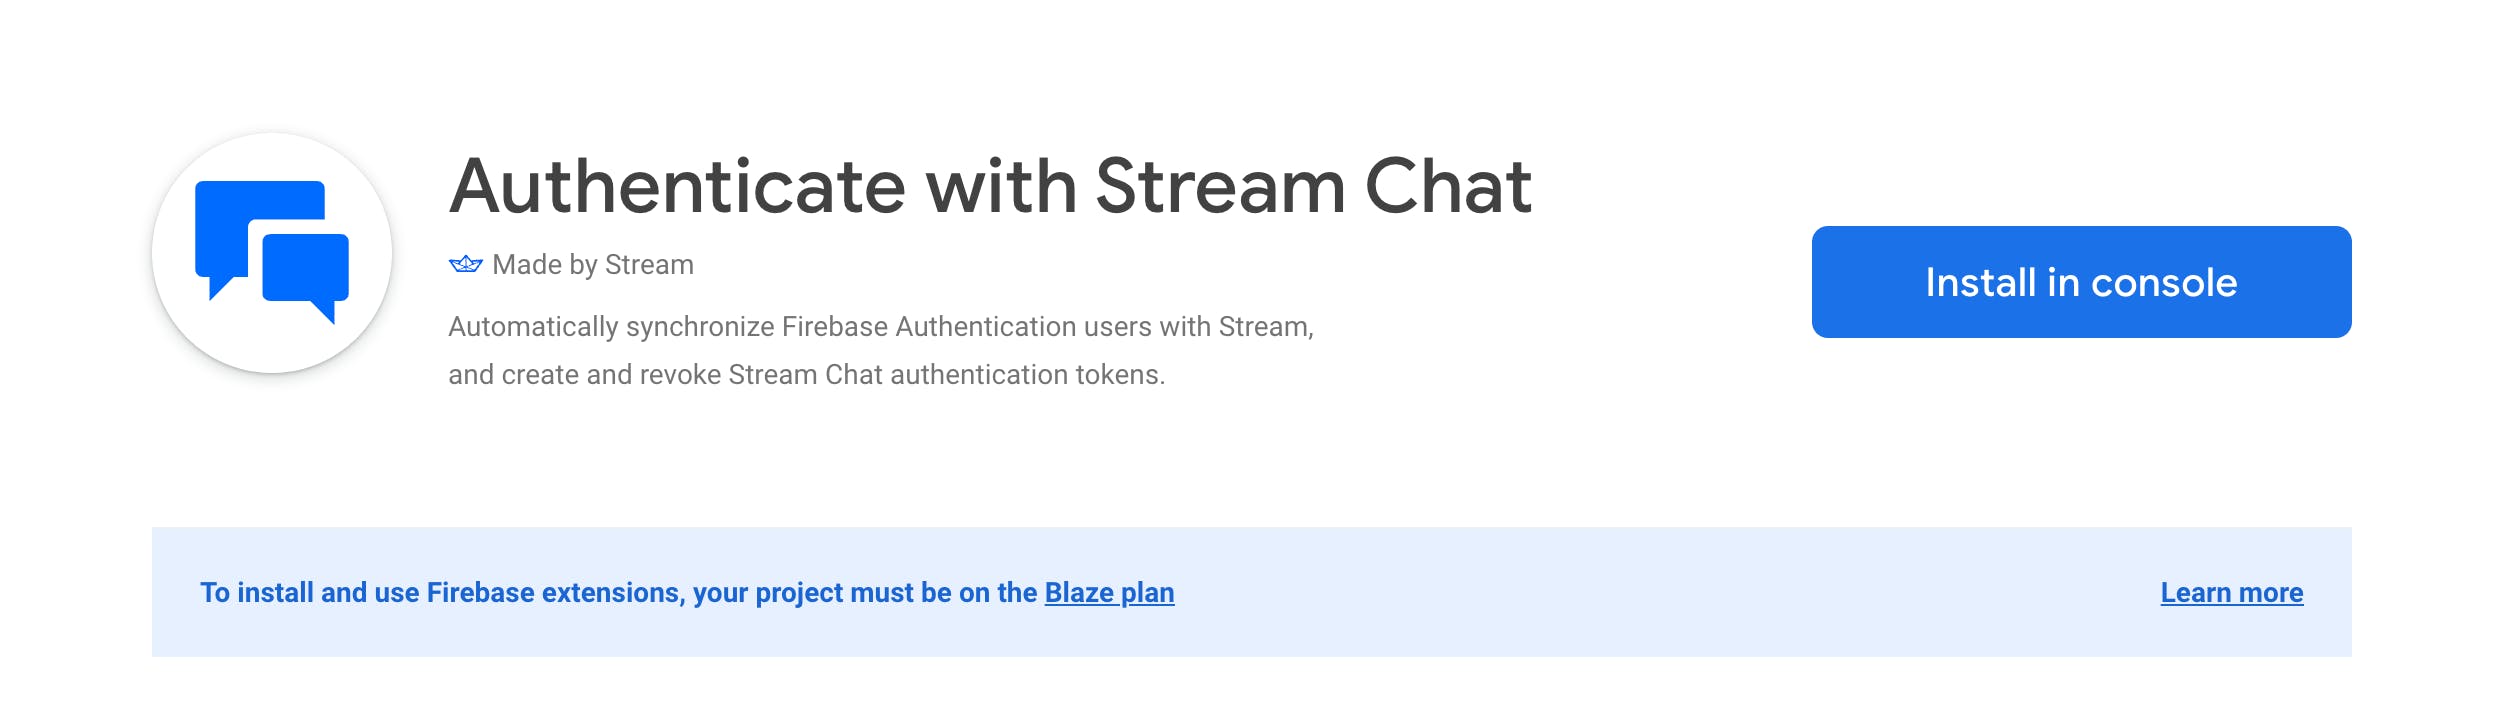 Authenticate With Chat